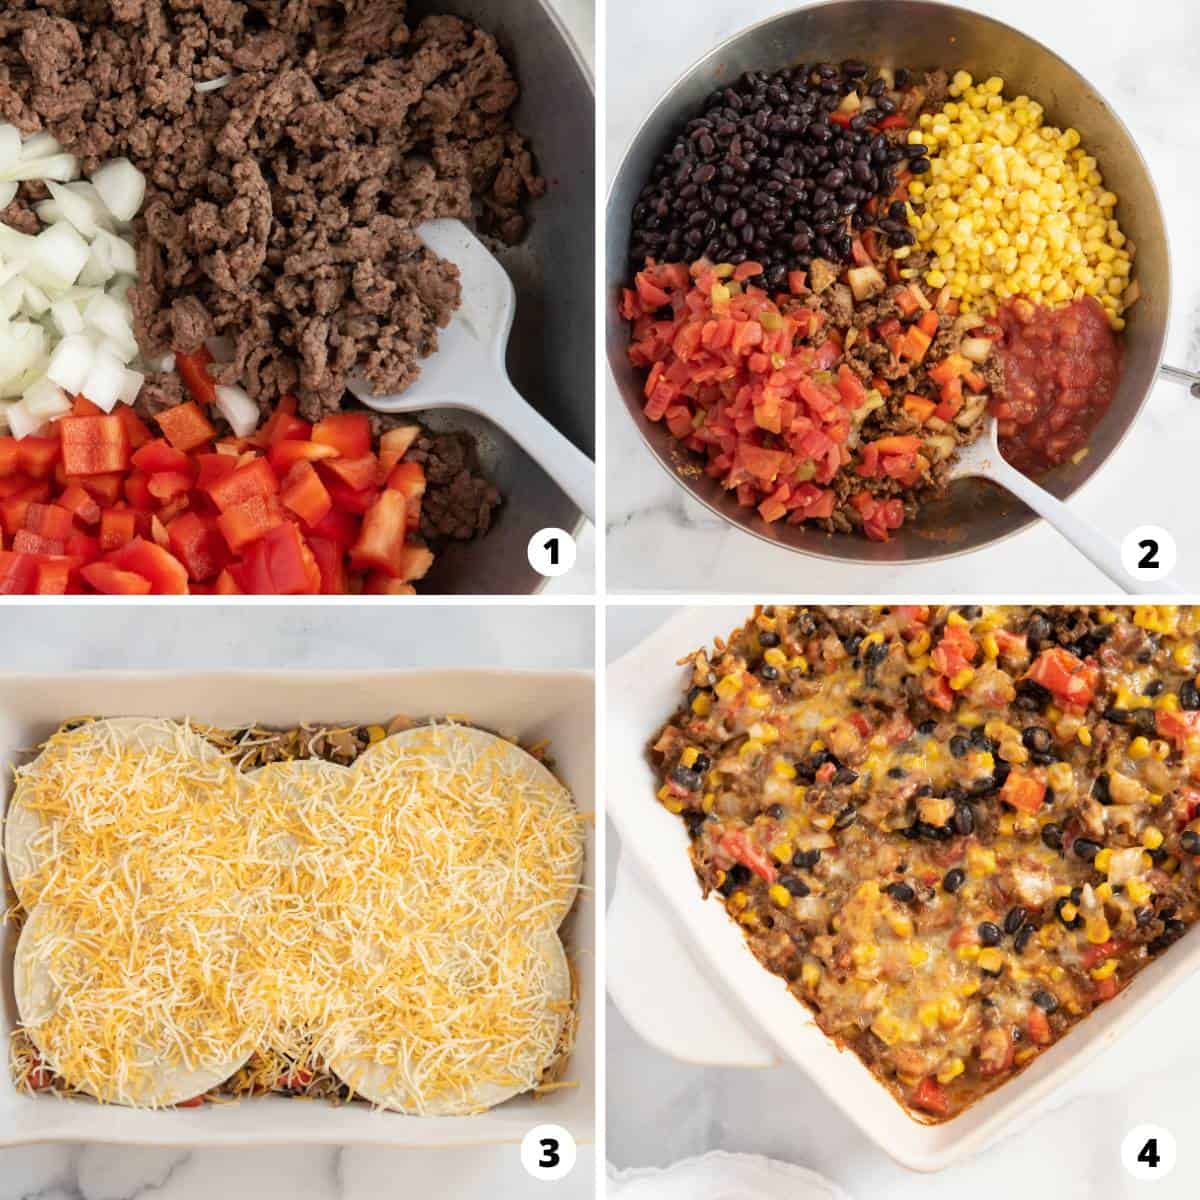 The process of making Mexican lasagna in a four step collage. 